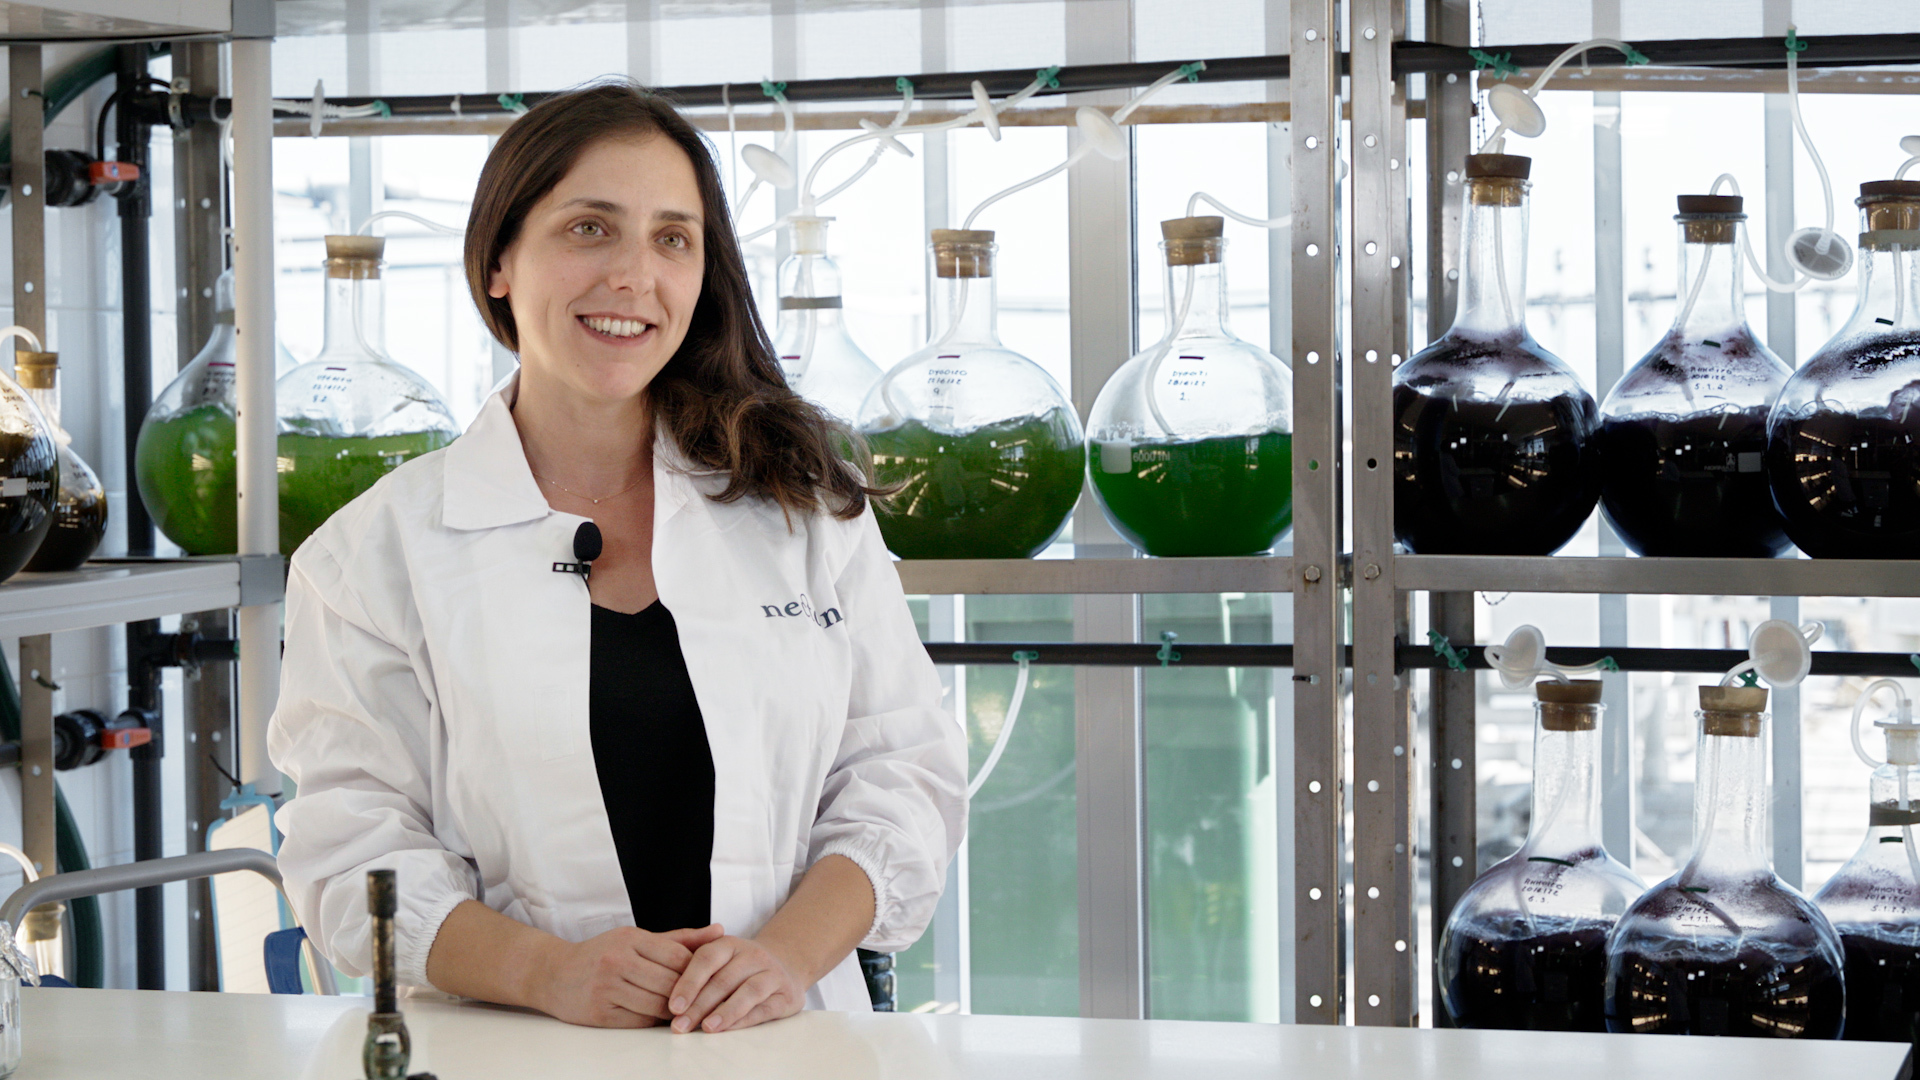 Mariana Carneiro in the inoculum room at Necton. Here, the microalgae are first cultivated in small flasks before finally being transferred to the outdoor photo-bioreactor